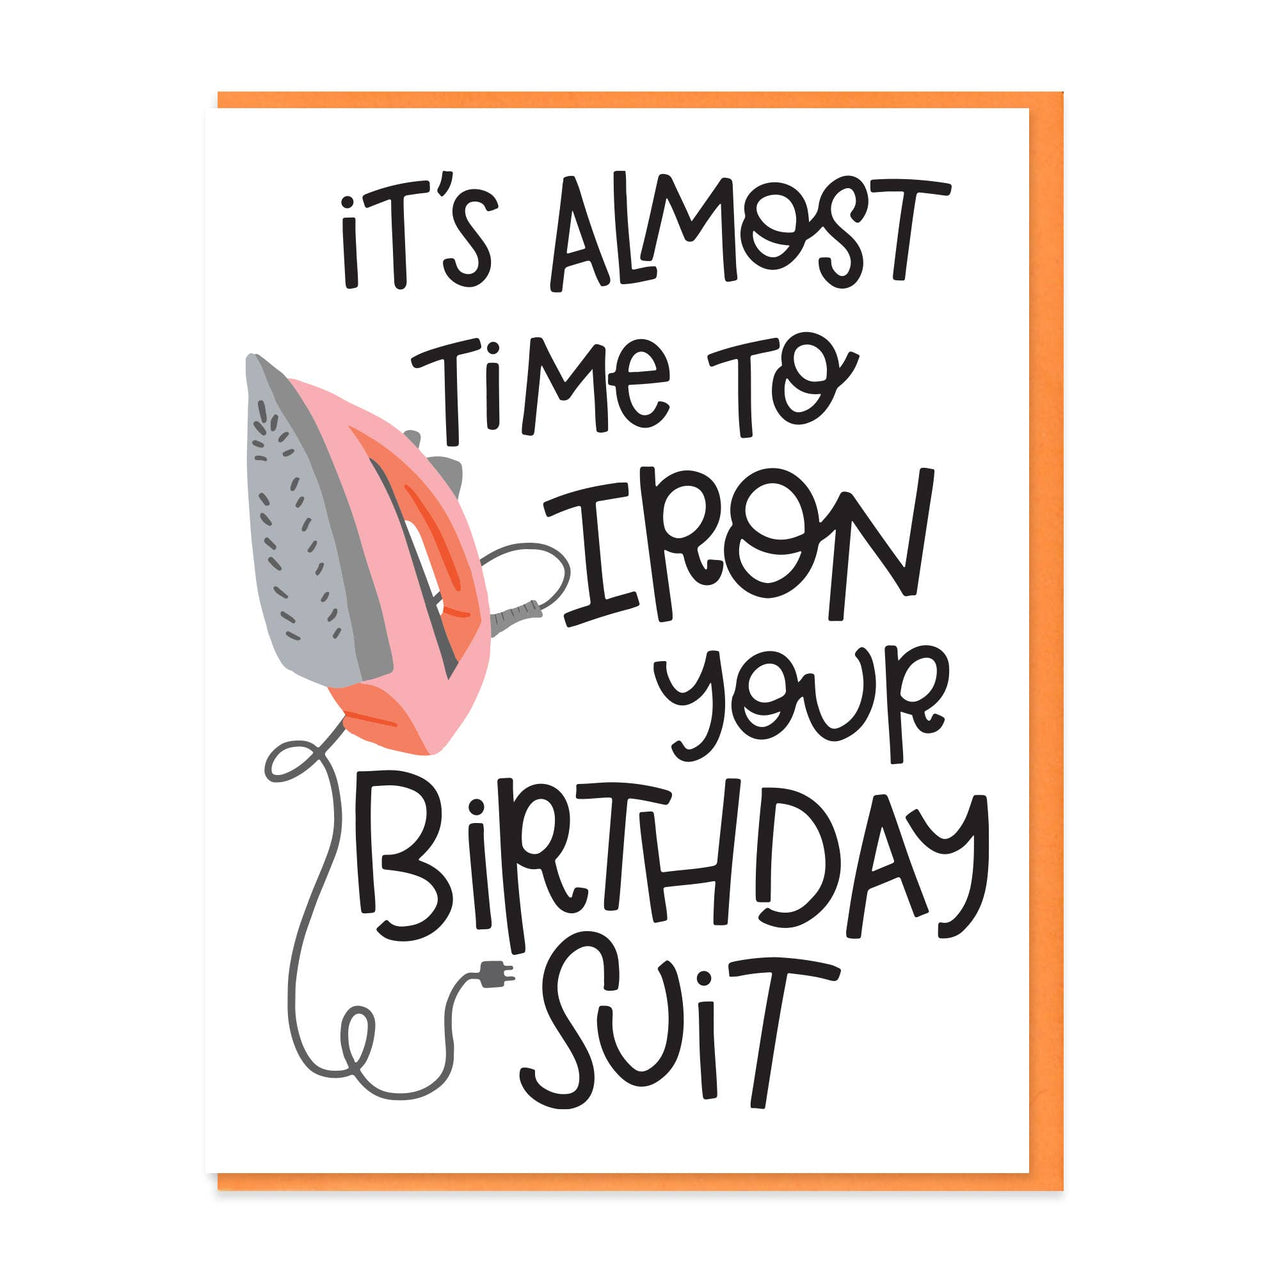 Iron Your Birthday Suit Card